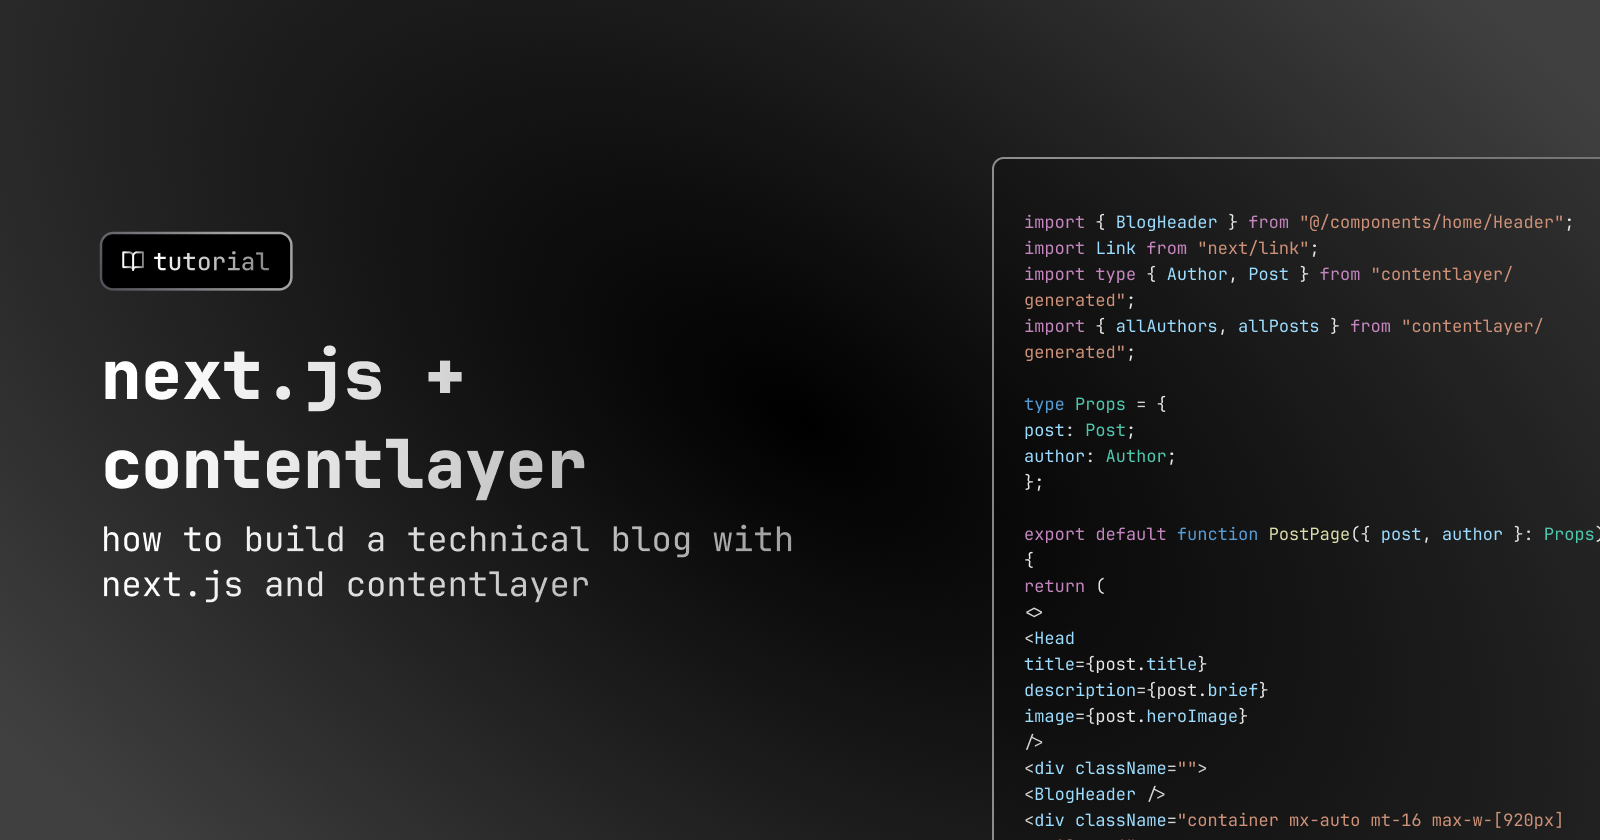 How to build a technical blog with Next.js and Contentlayer